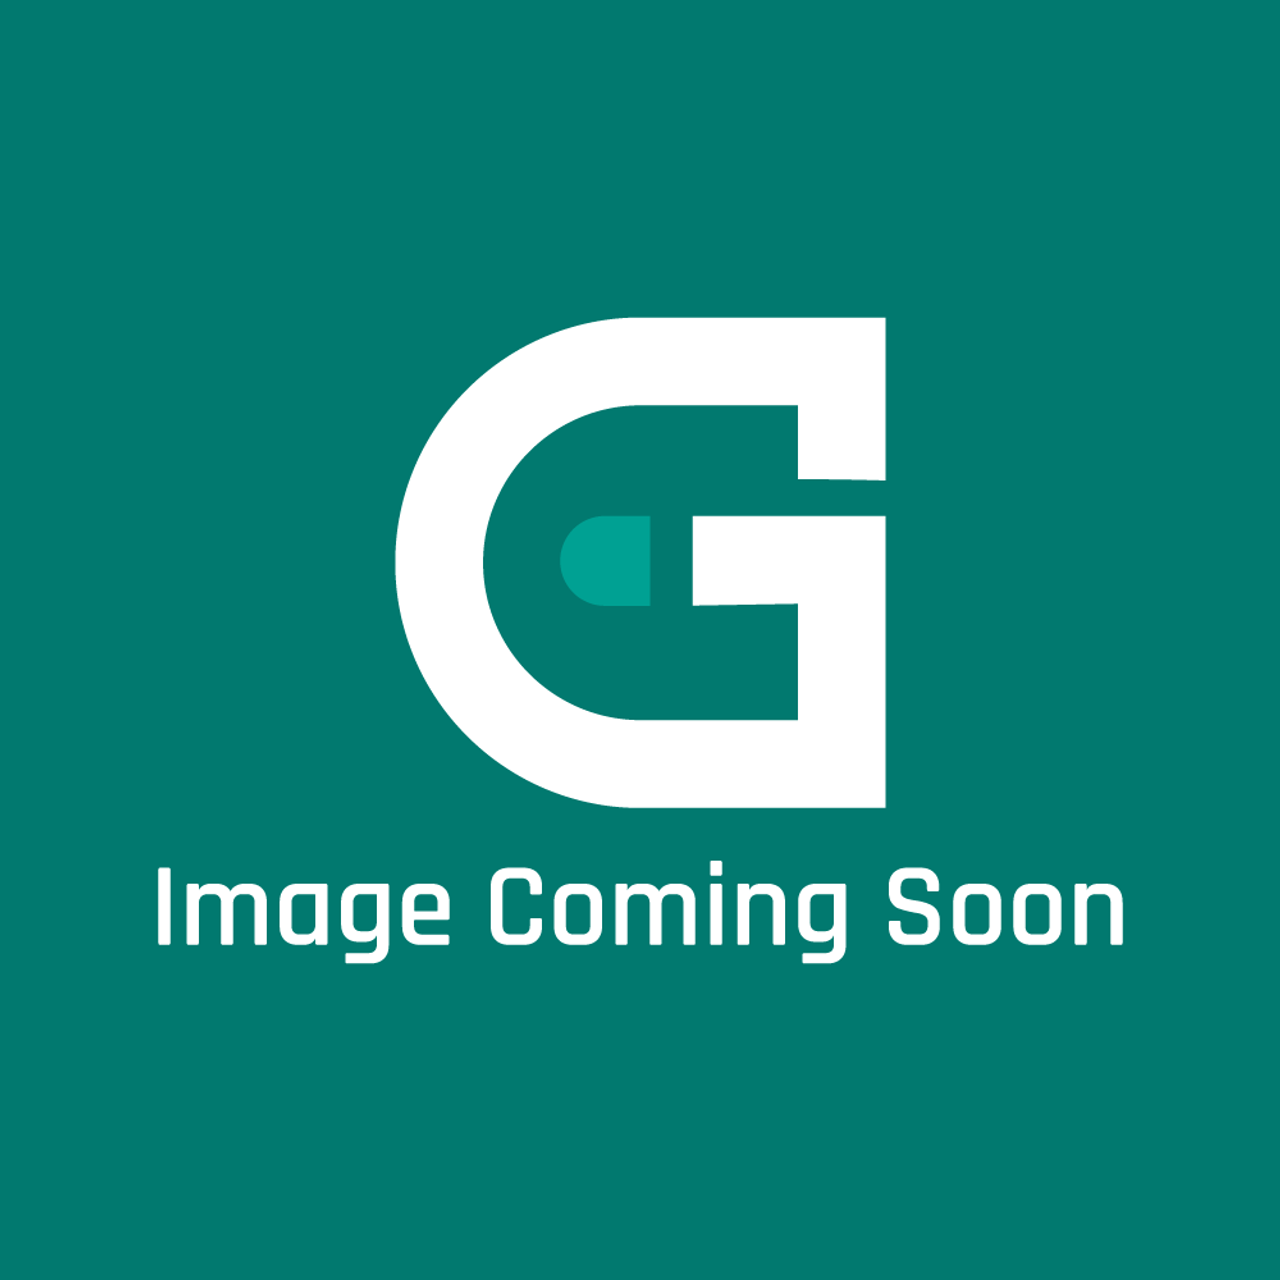 GE Appliances WR17X30905 - 42/48" Air Tower / Cover - Image Coming Soon!